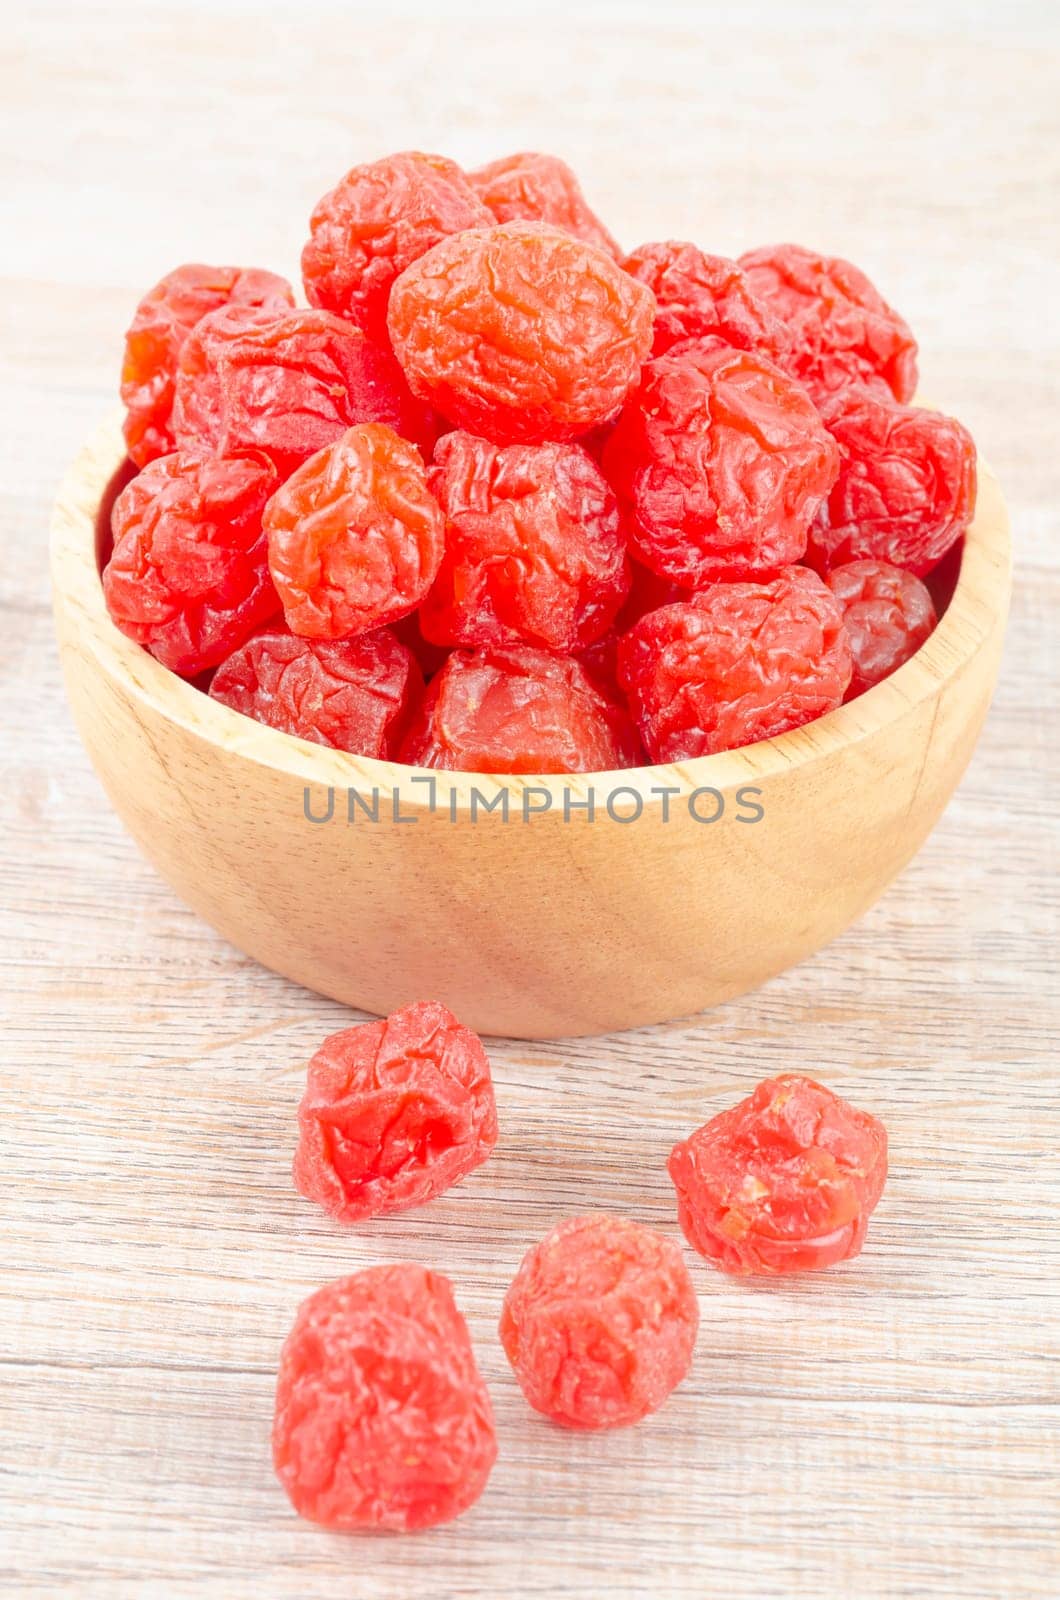 The Dried red prunes fruits (Preserved fruits Chinese plum) in wooden bowl on wooden background. by Gamjai